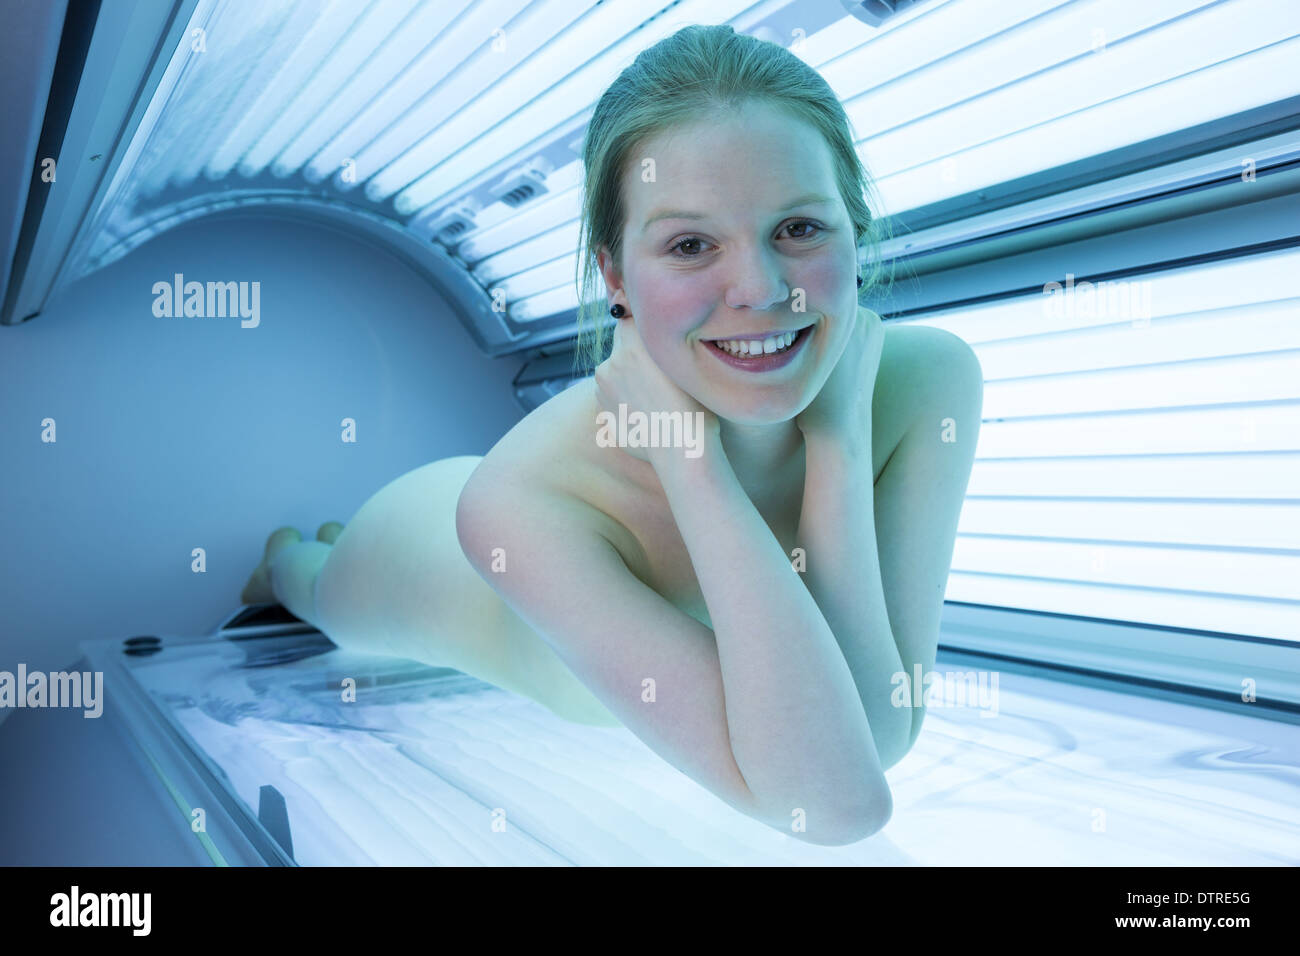 Nude in tanning bed